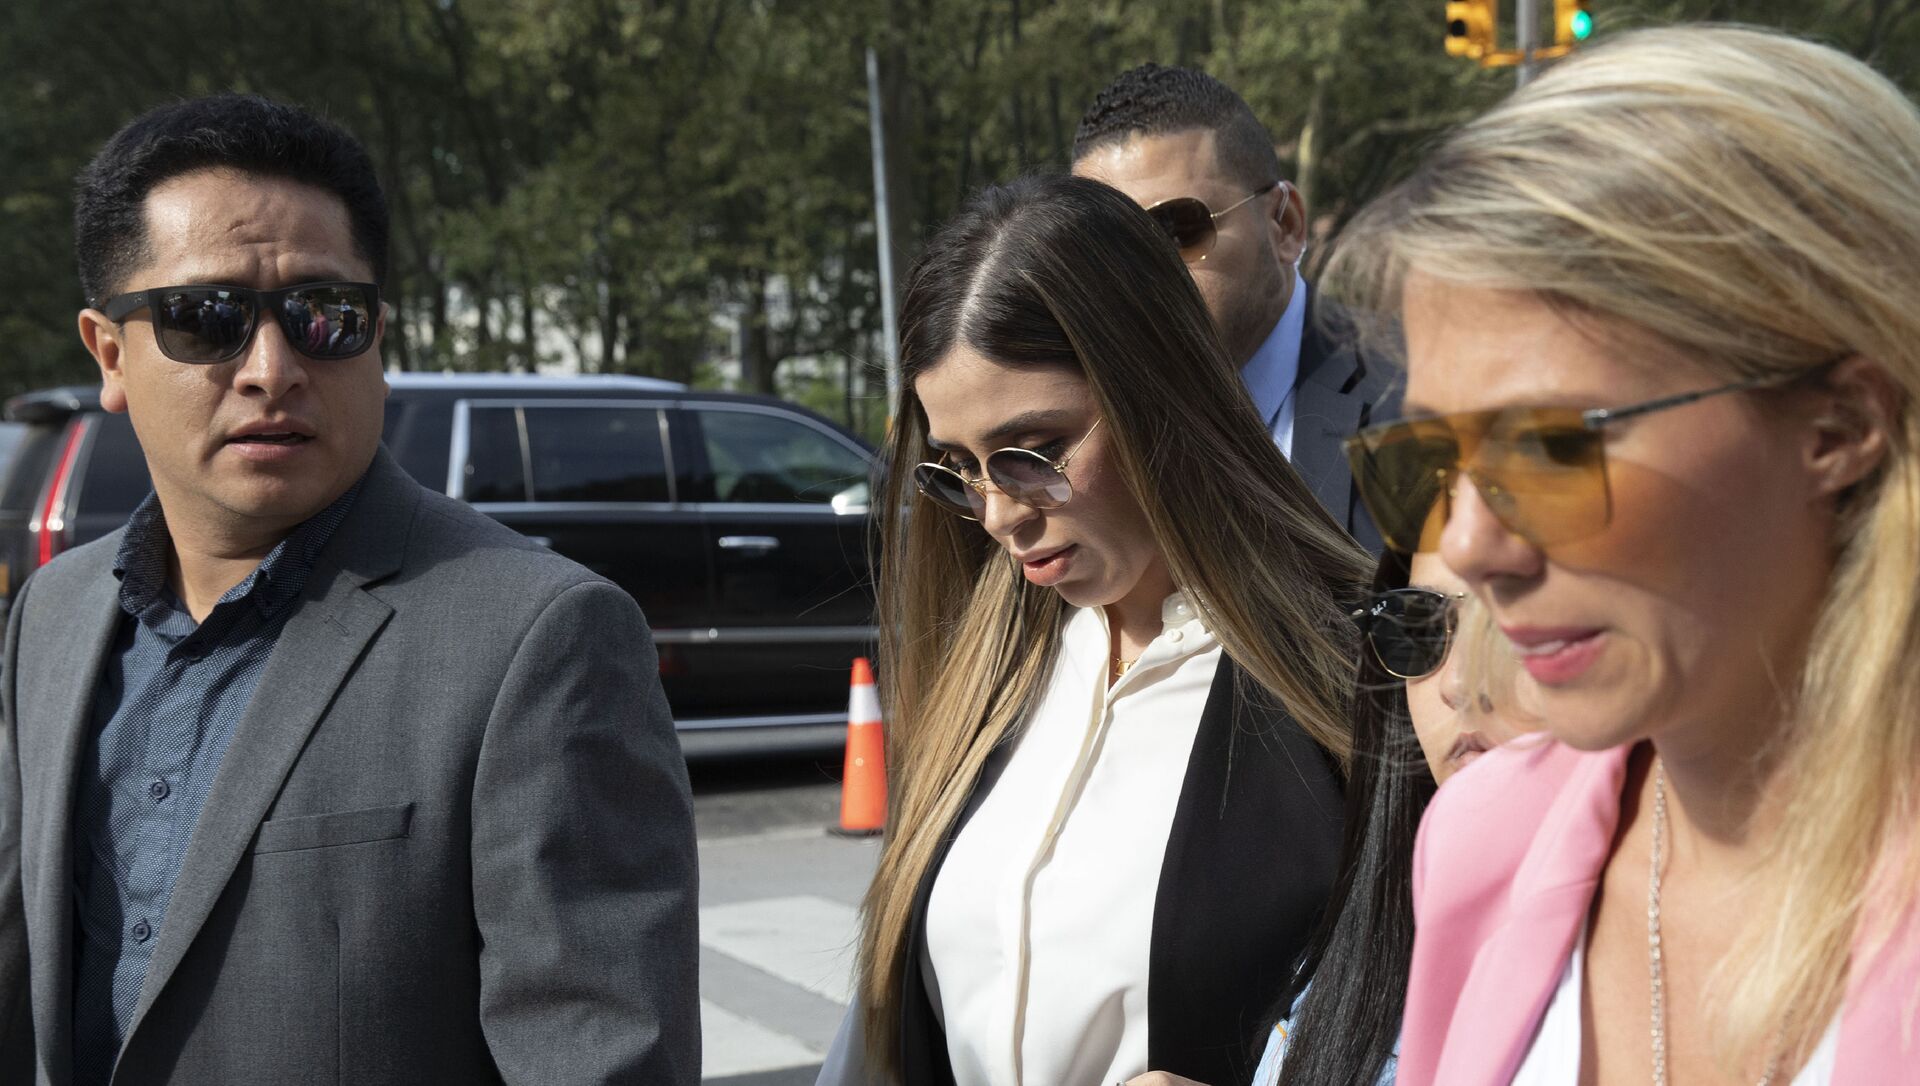  In this July 17, 2019 file photo, Emma Coronel Aispuro, center, wife of Mexican drug lord Joaquin El Chapo Guzman, arrives for his sentencing at Brooklyn federal court, in New York. According to the United States Department of Justice, Coronel has been arrested on Monday, Feb. 22, 2021, under drug trafficking charges - Sputnik International, 1920, 10.06.2021